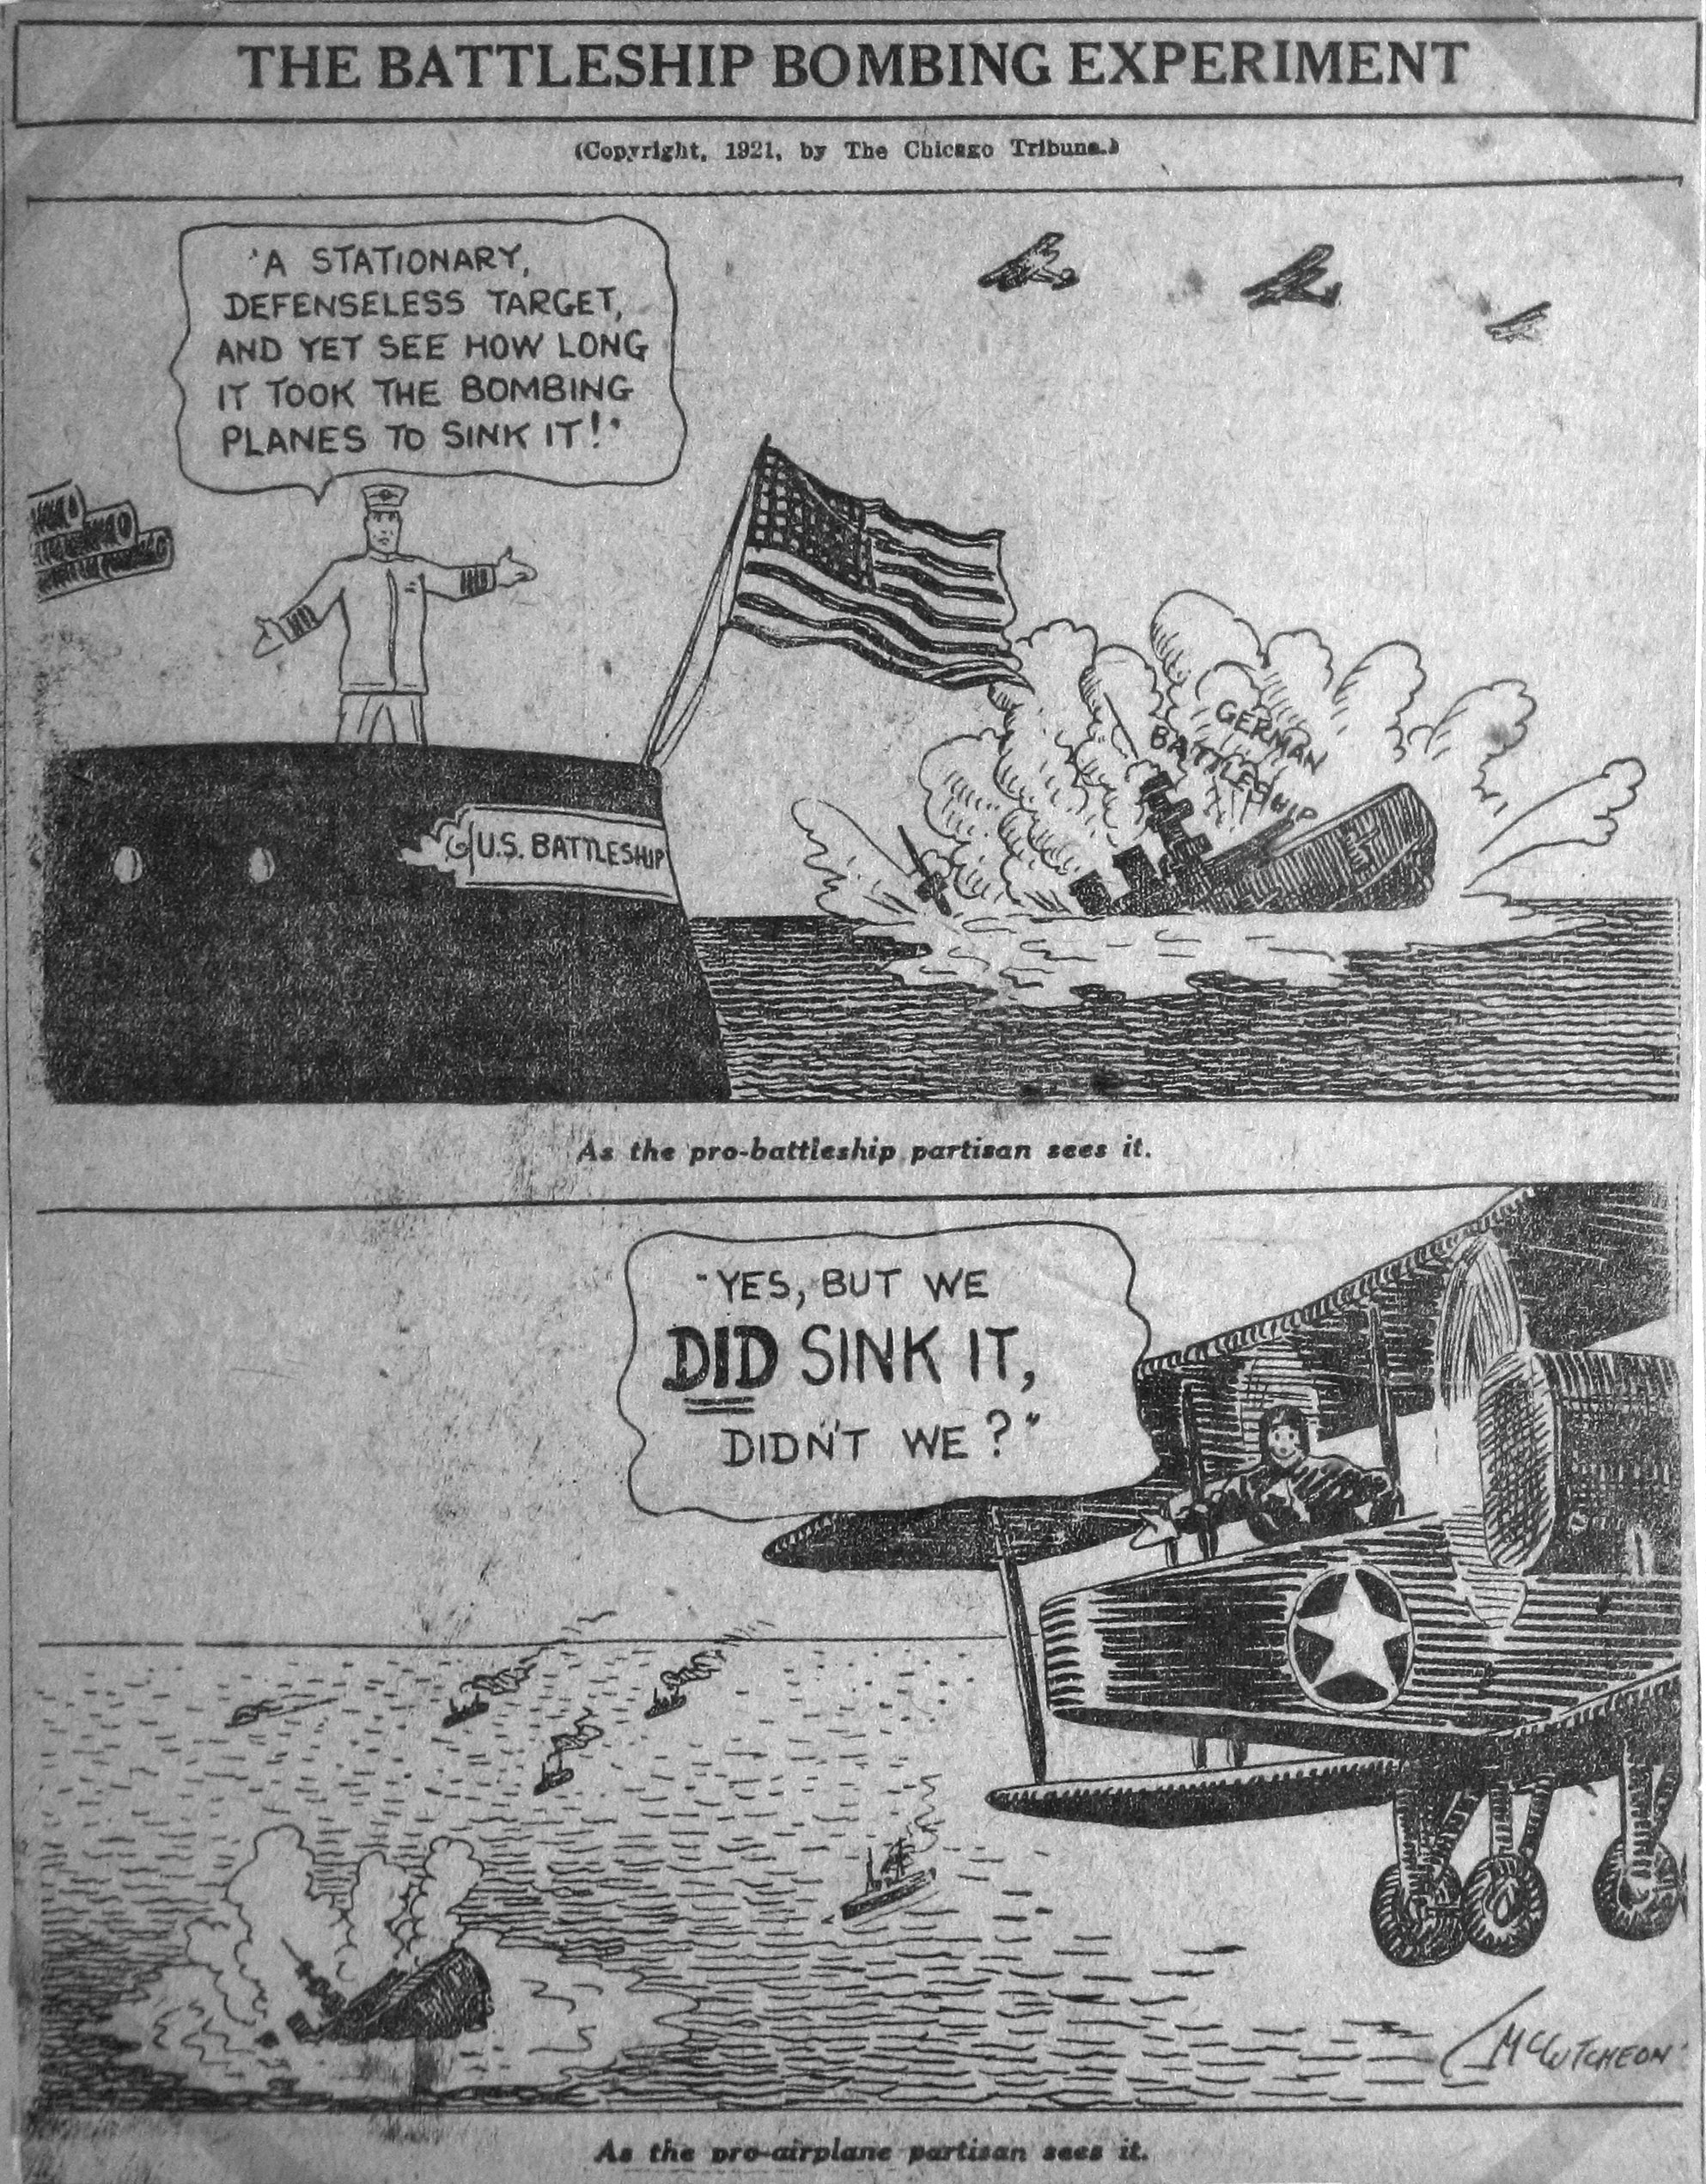 1921 cartoon in the Chicago Tribune of the Billy Mitchell Battleship Bombing Experiment.